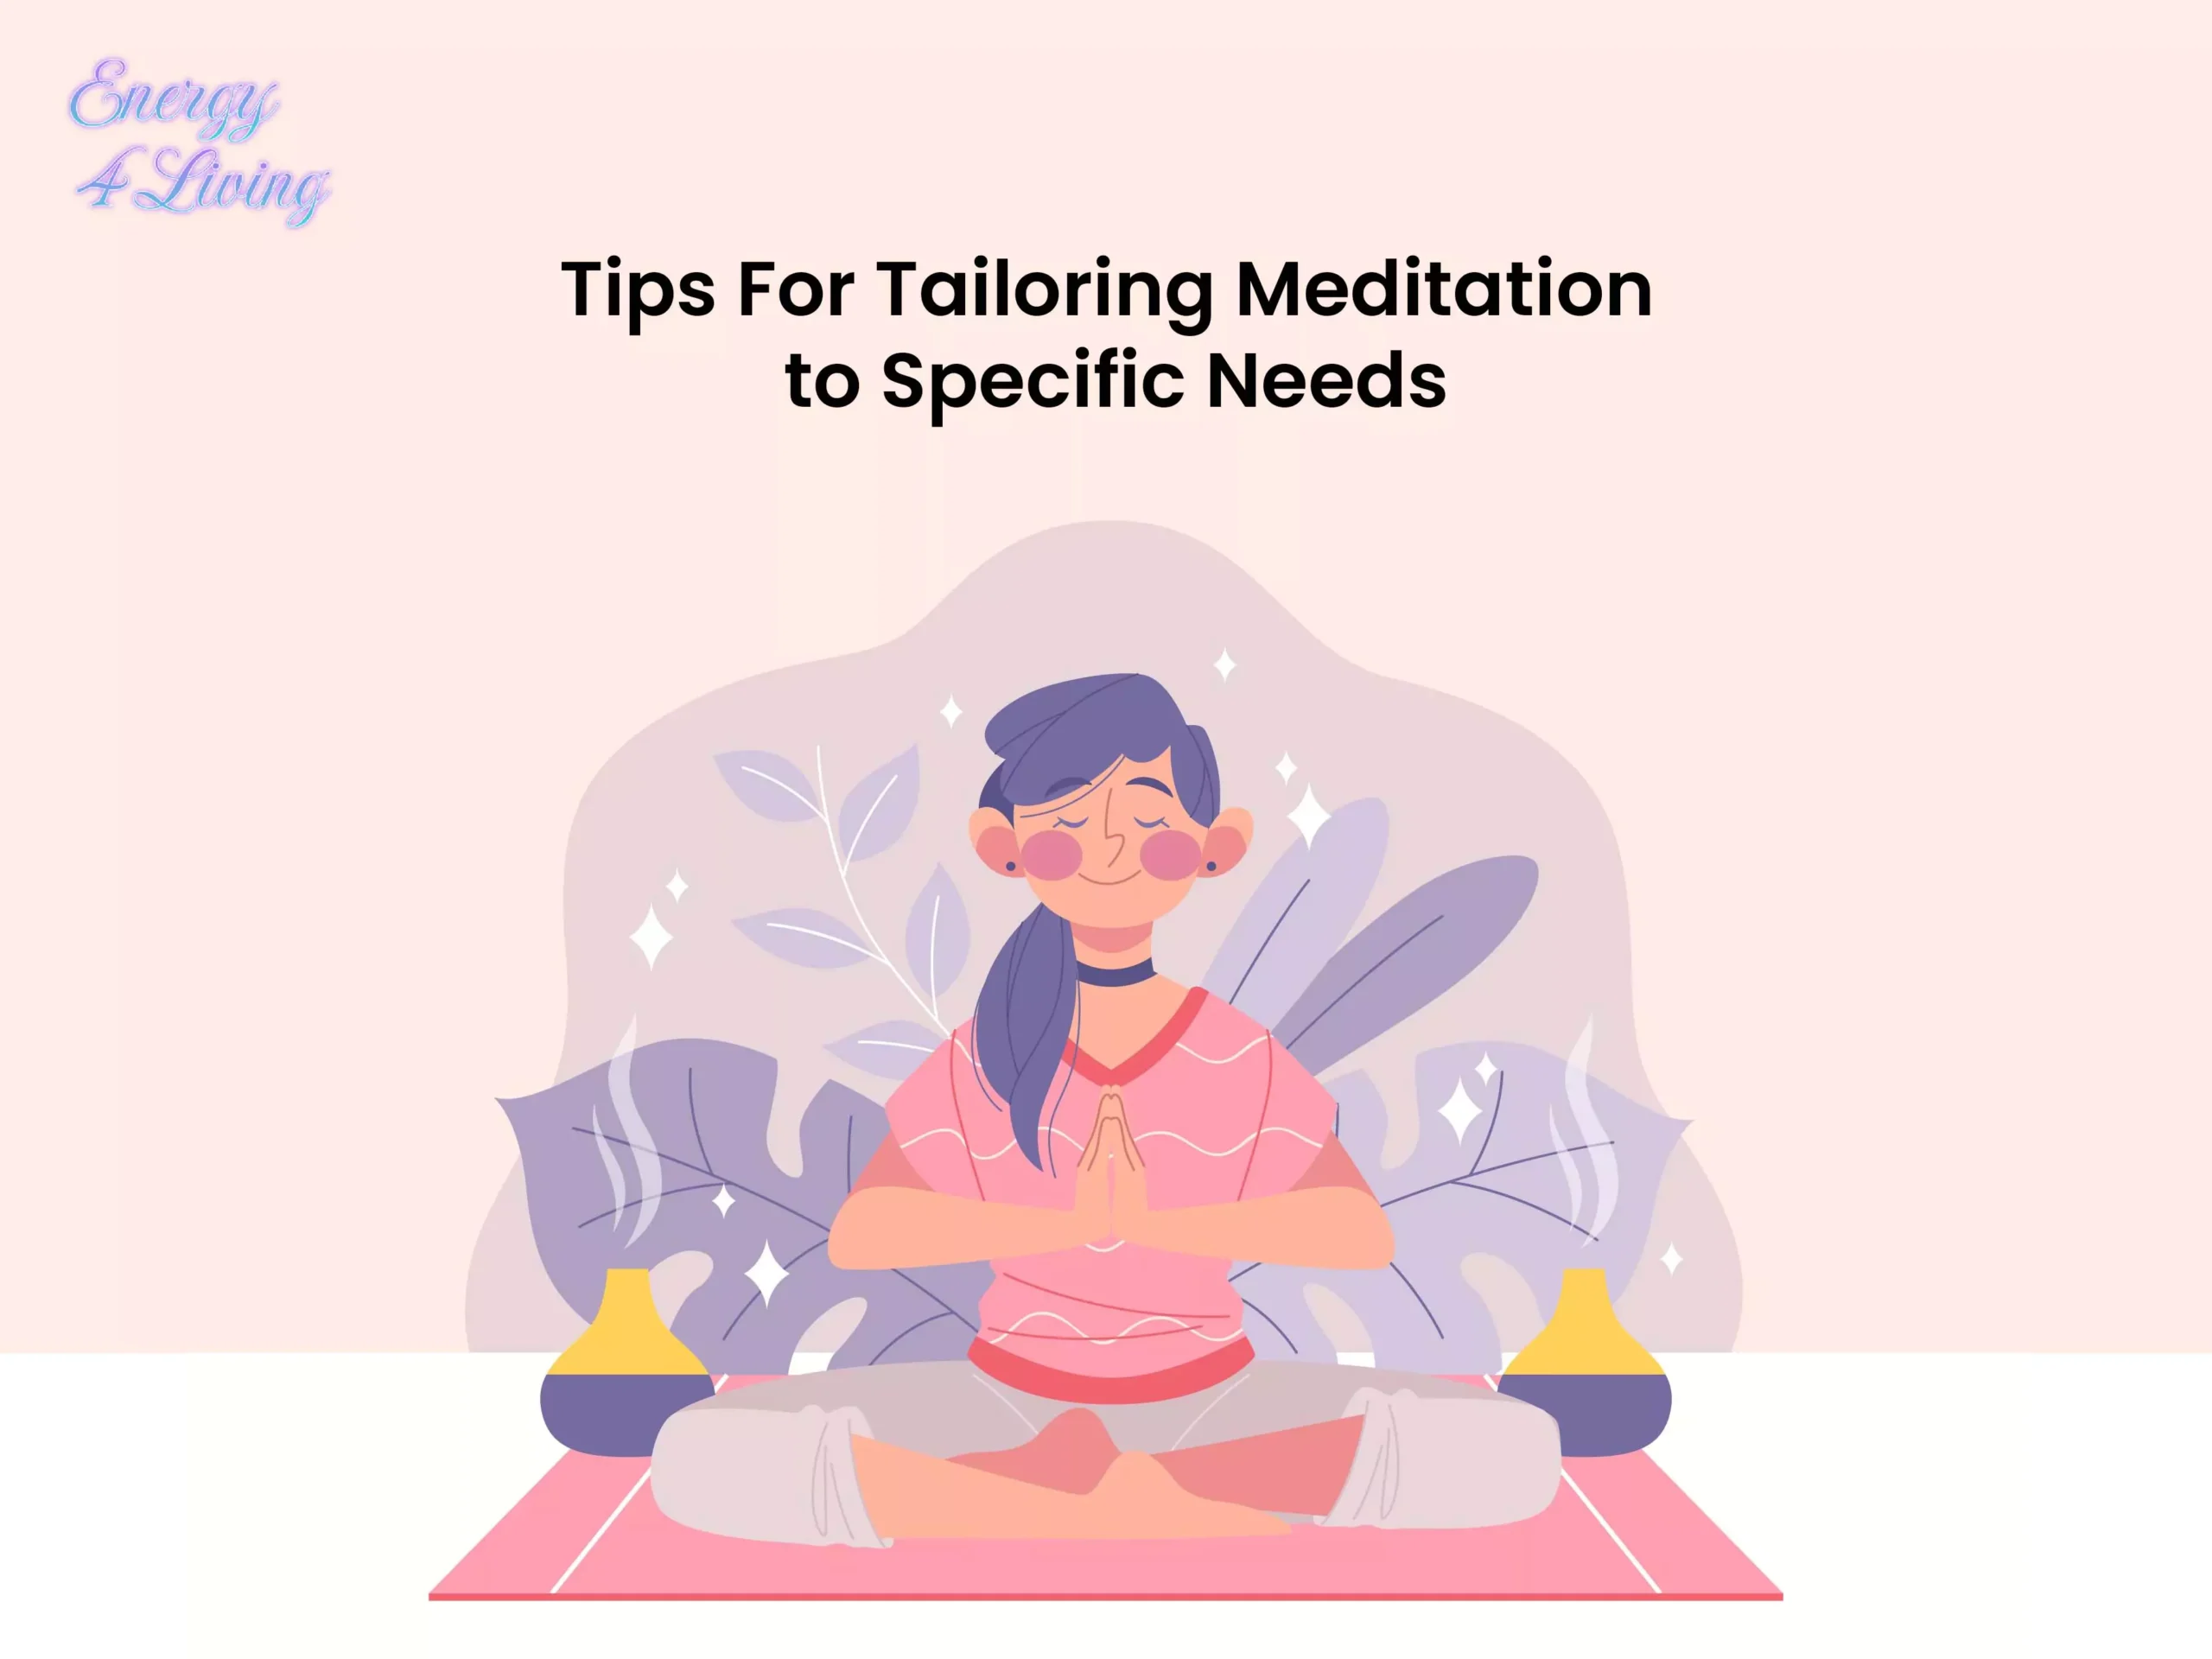 Tips For Tailoring Meditation to Specific Needs